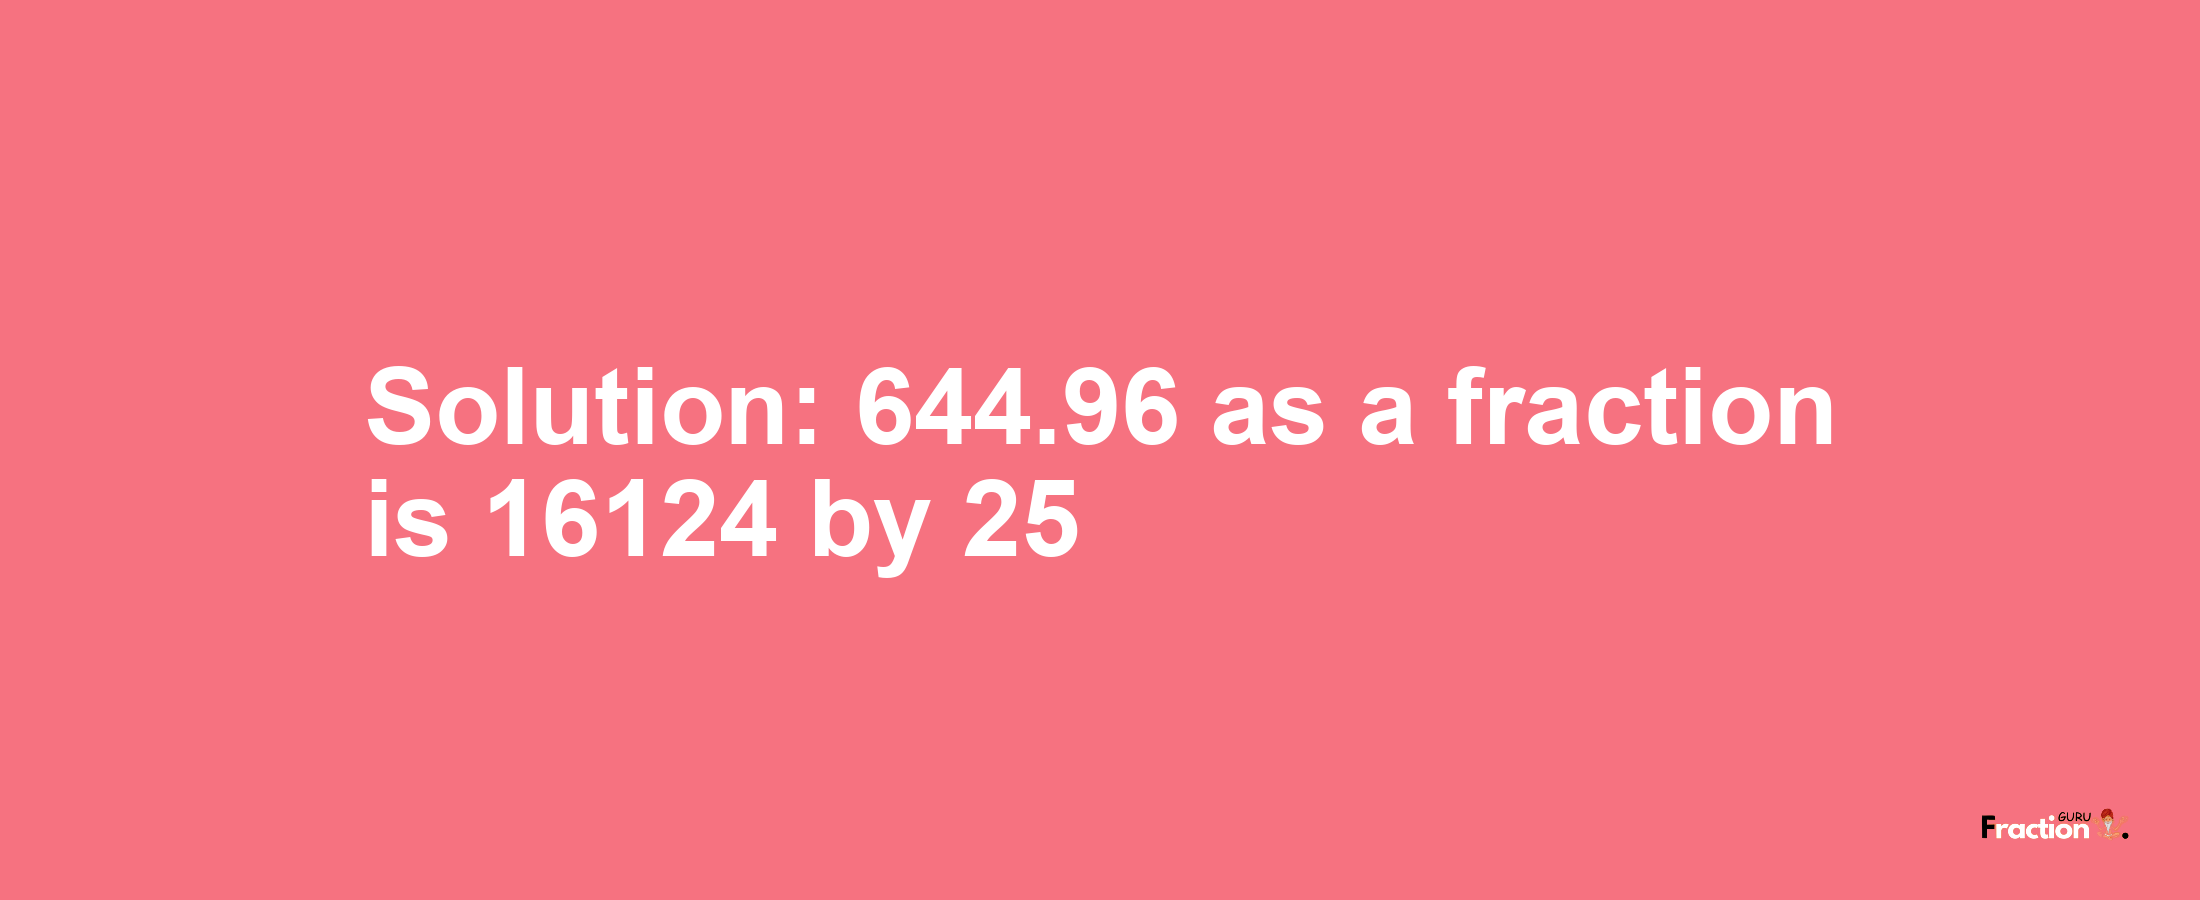 Solution:644.96 as a fraction is 16124/25